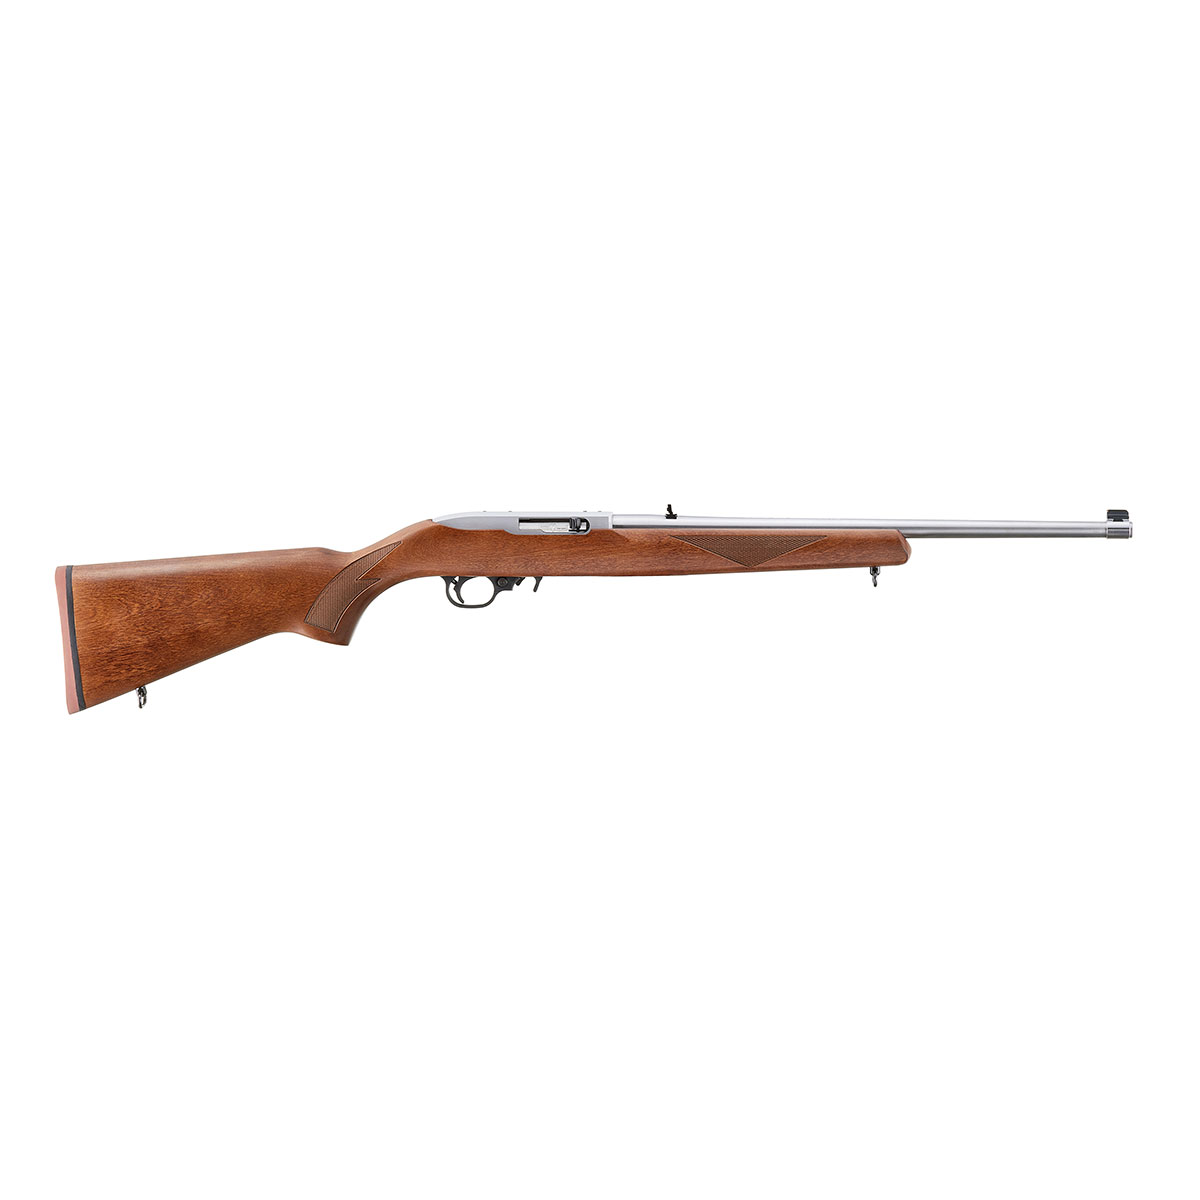 RUGER - 75TH YEAR ANNIVERSARY 10/22 SPORTER 22 LONG RIFLE SEMIAUTO RIFLE